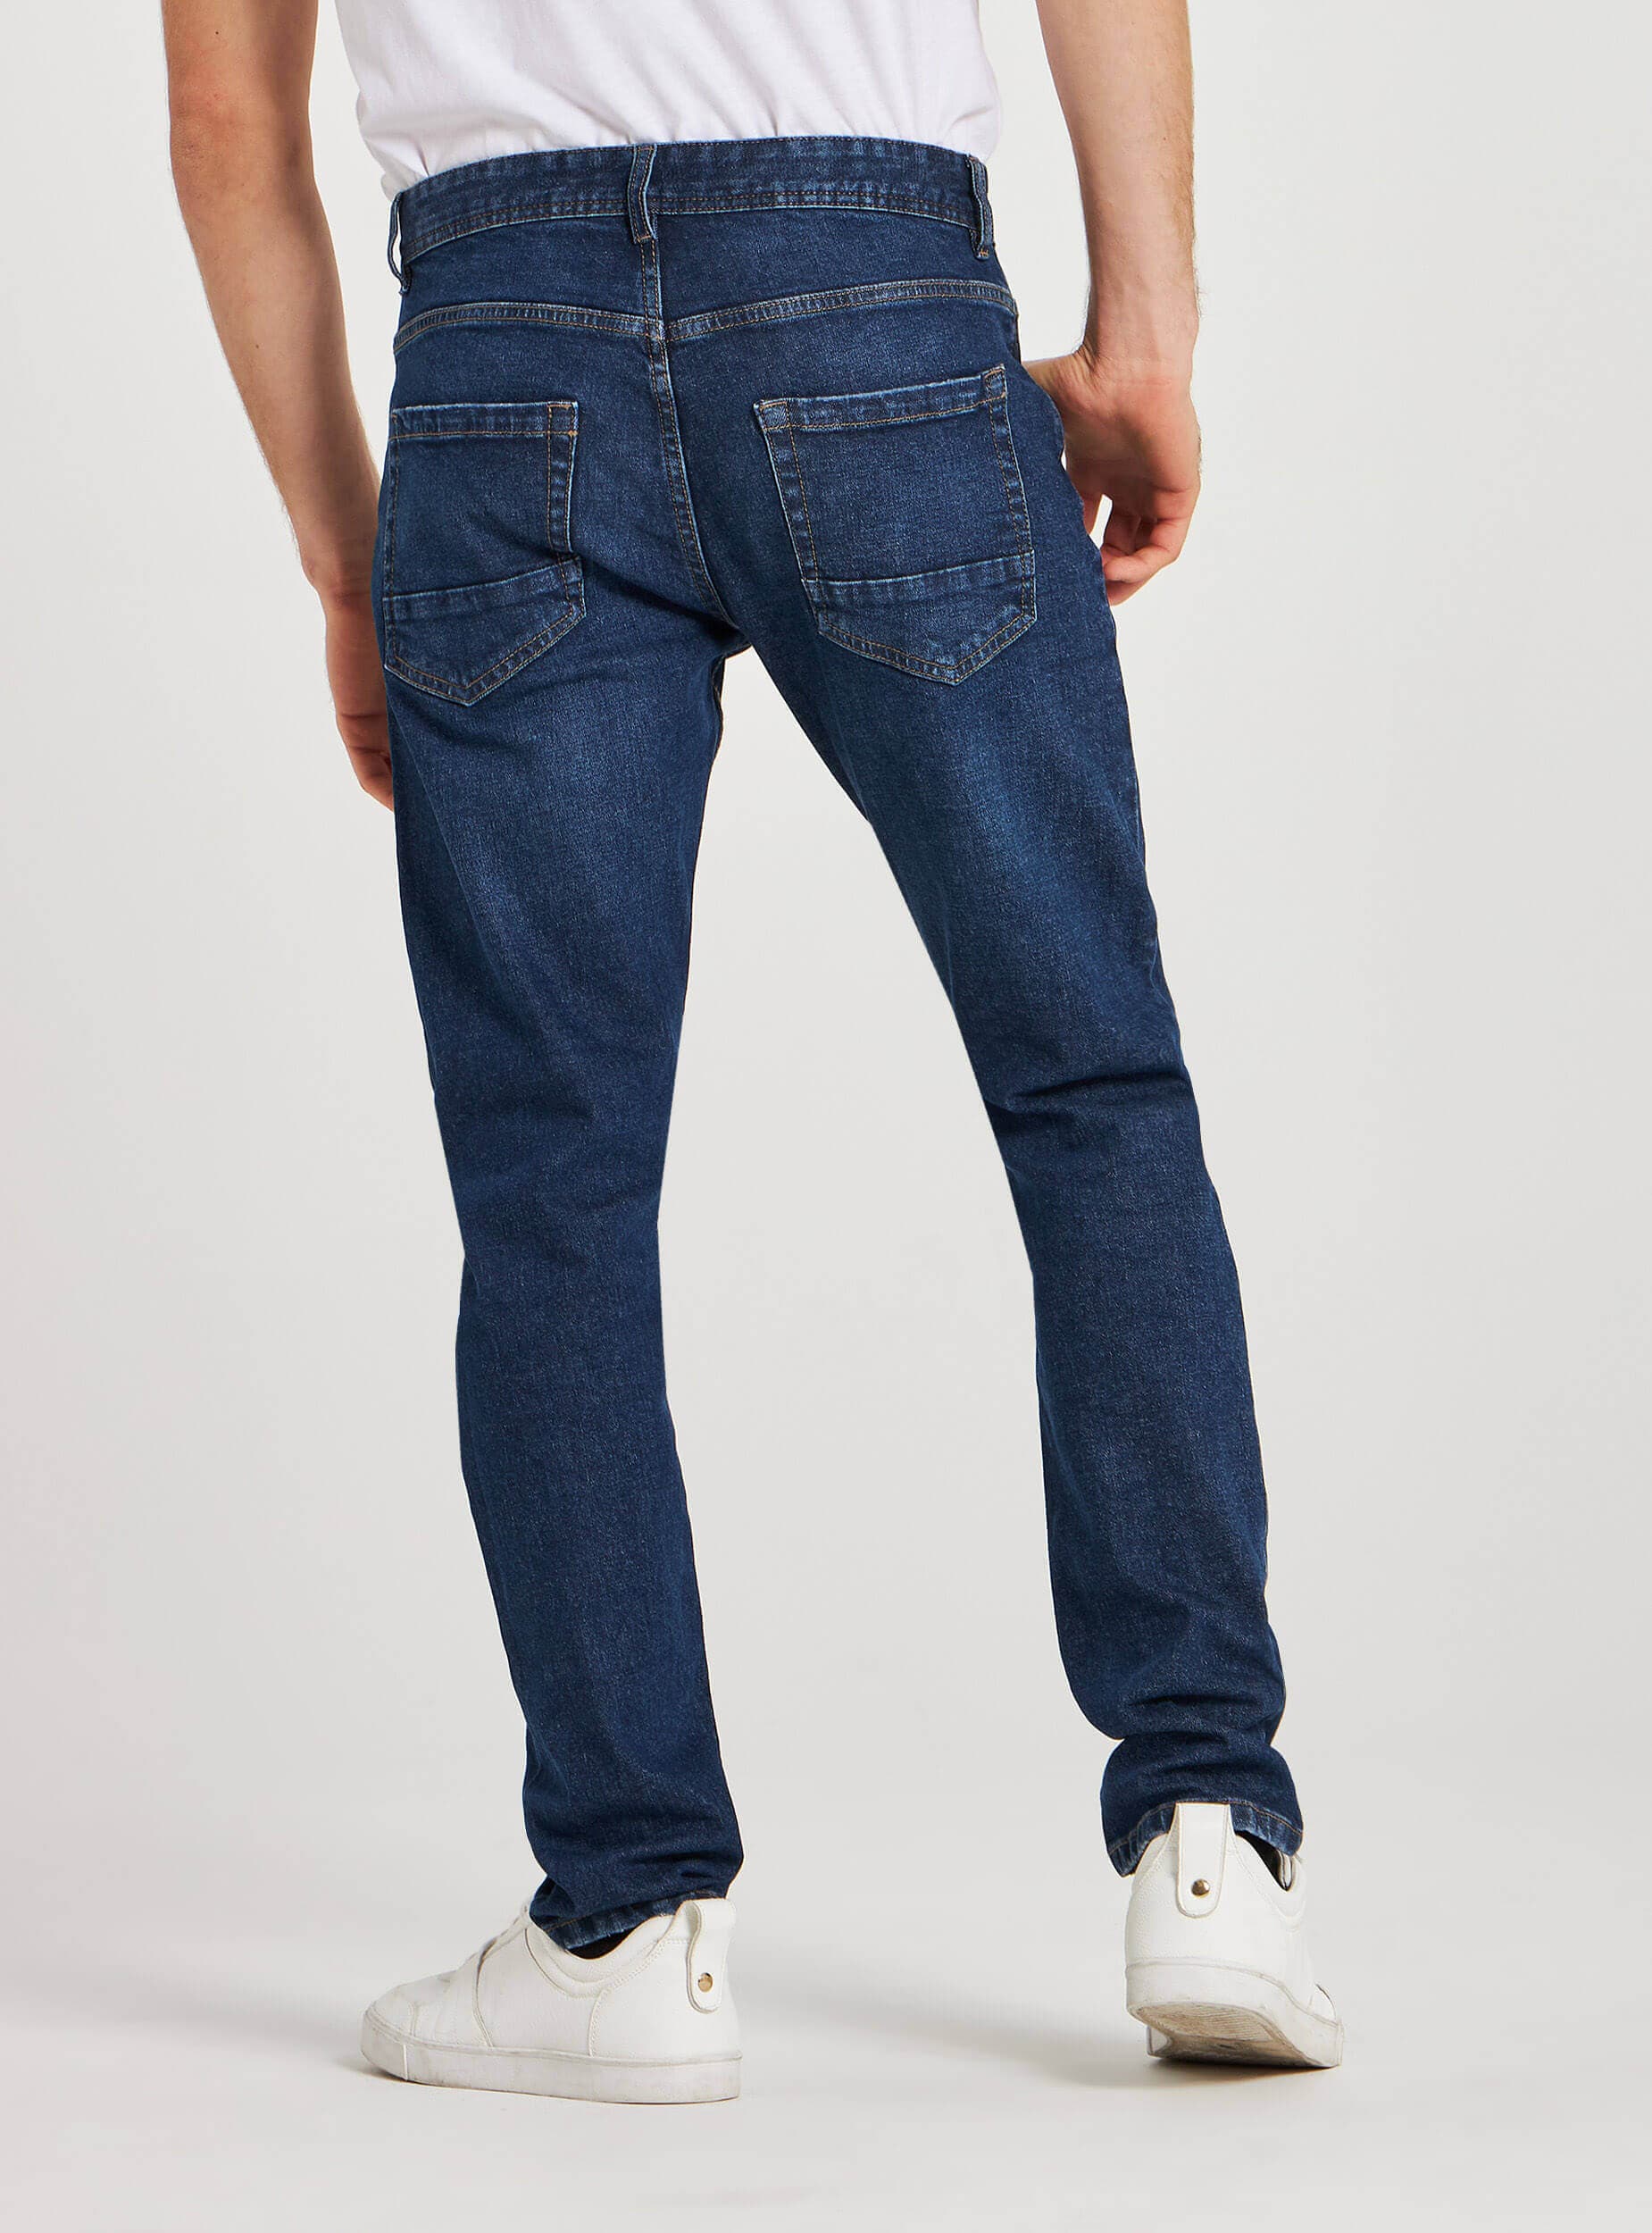 denim jeans and casuals online